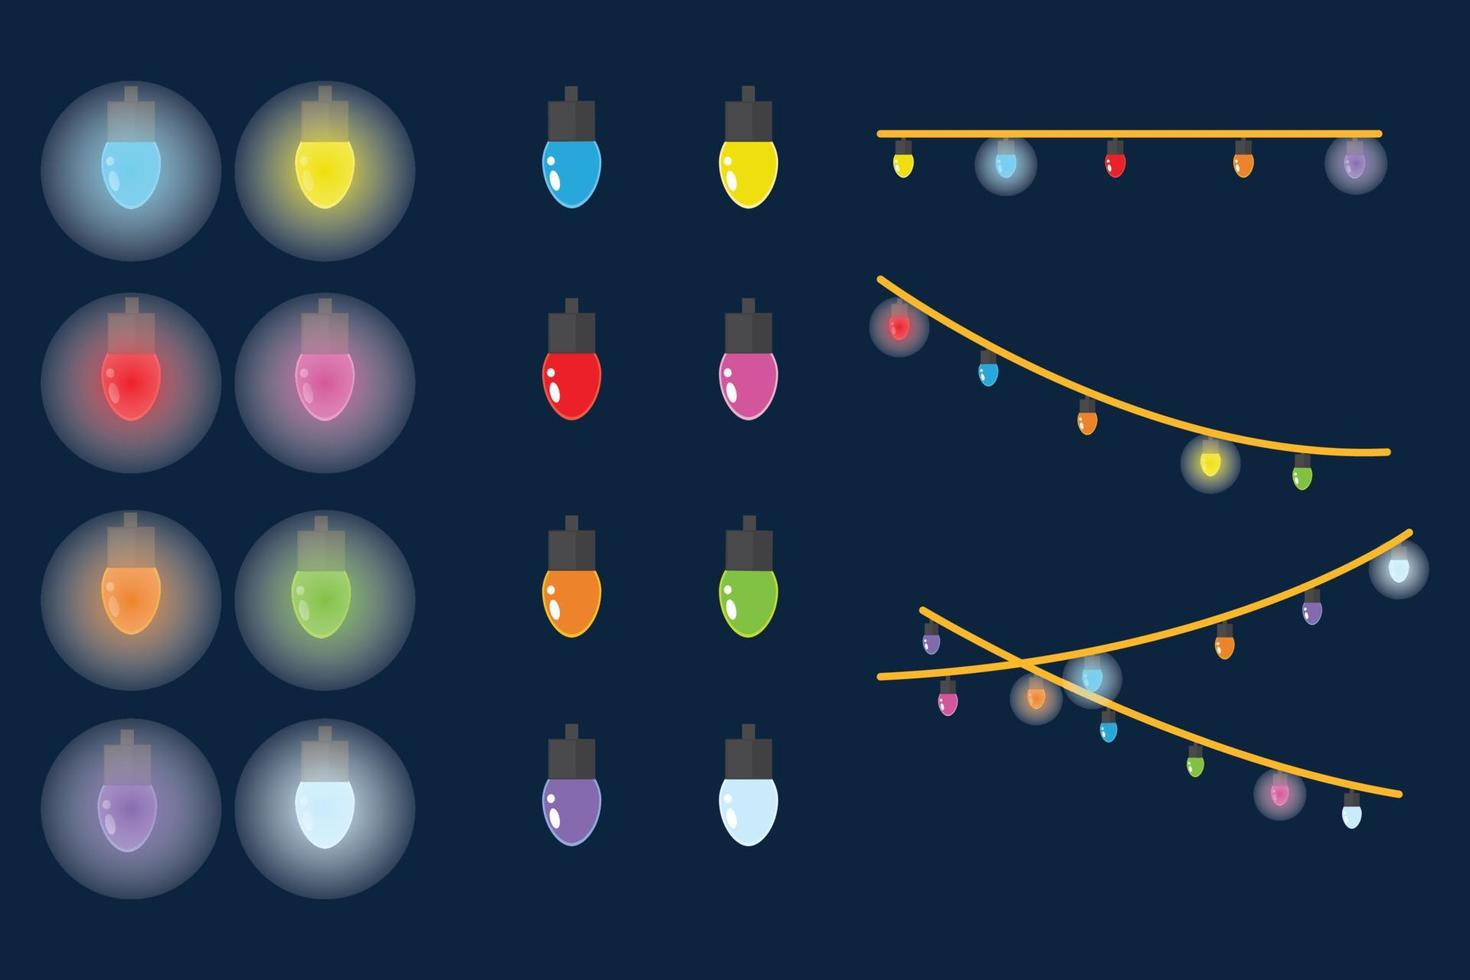 Illustration of Staple Lights Various Colors for Christmas Tree Decoration vector EPS10